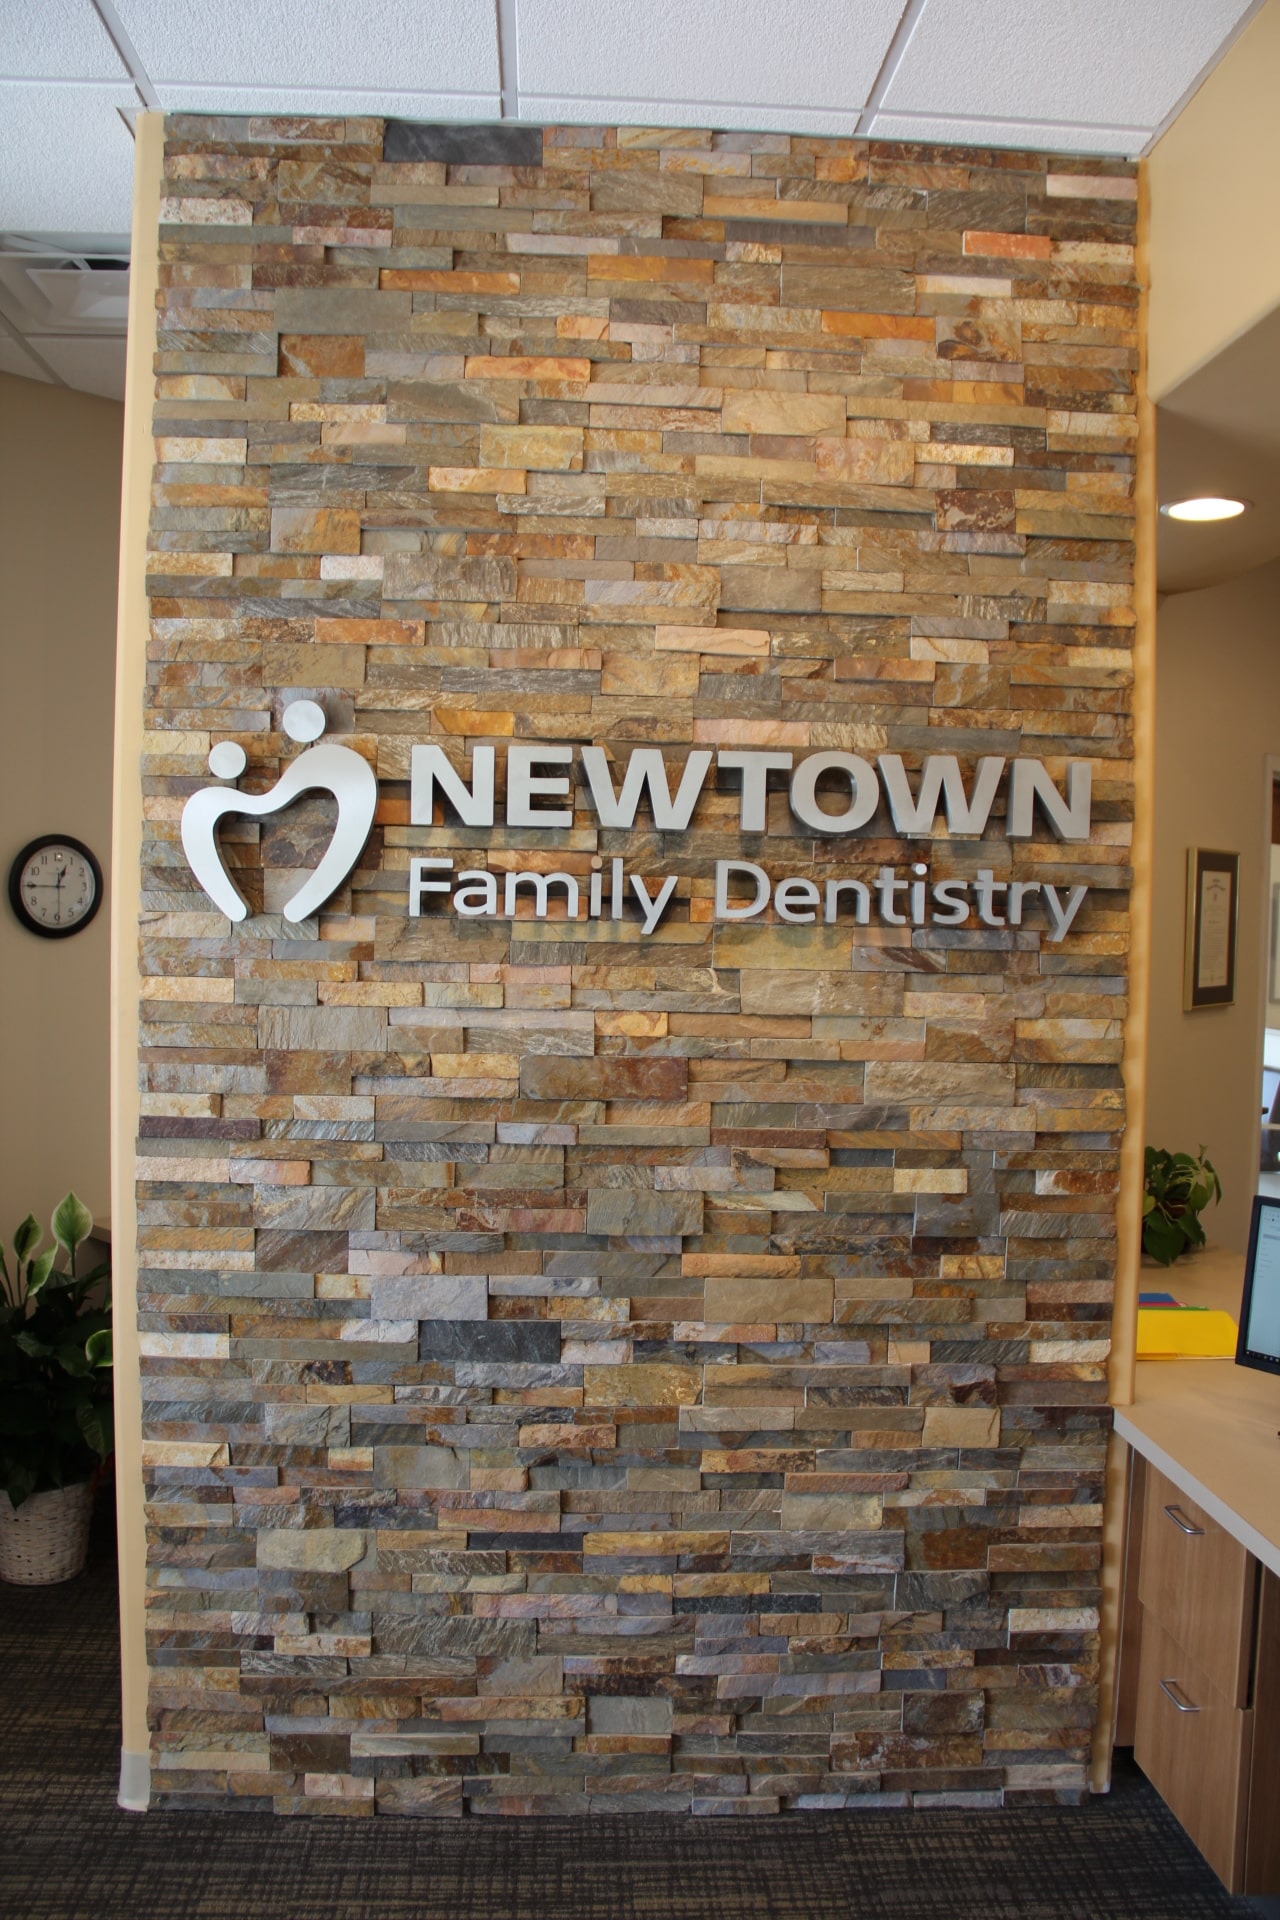 Norstone Ochre Stacked Stone Veneer Rock Panels used on feature wall with signage for dentist practice